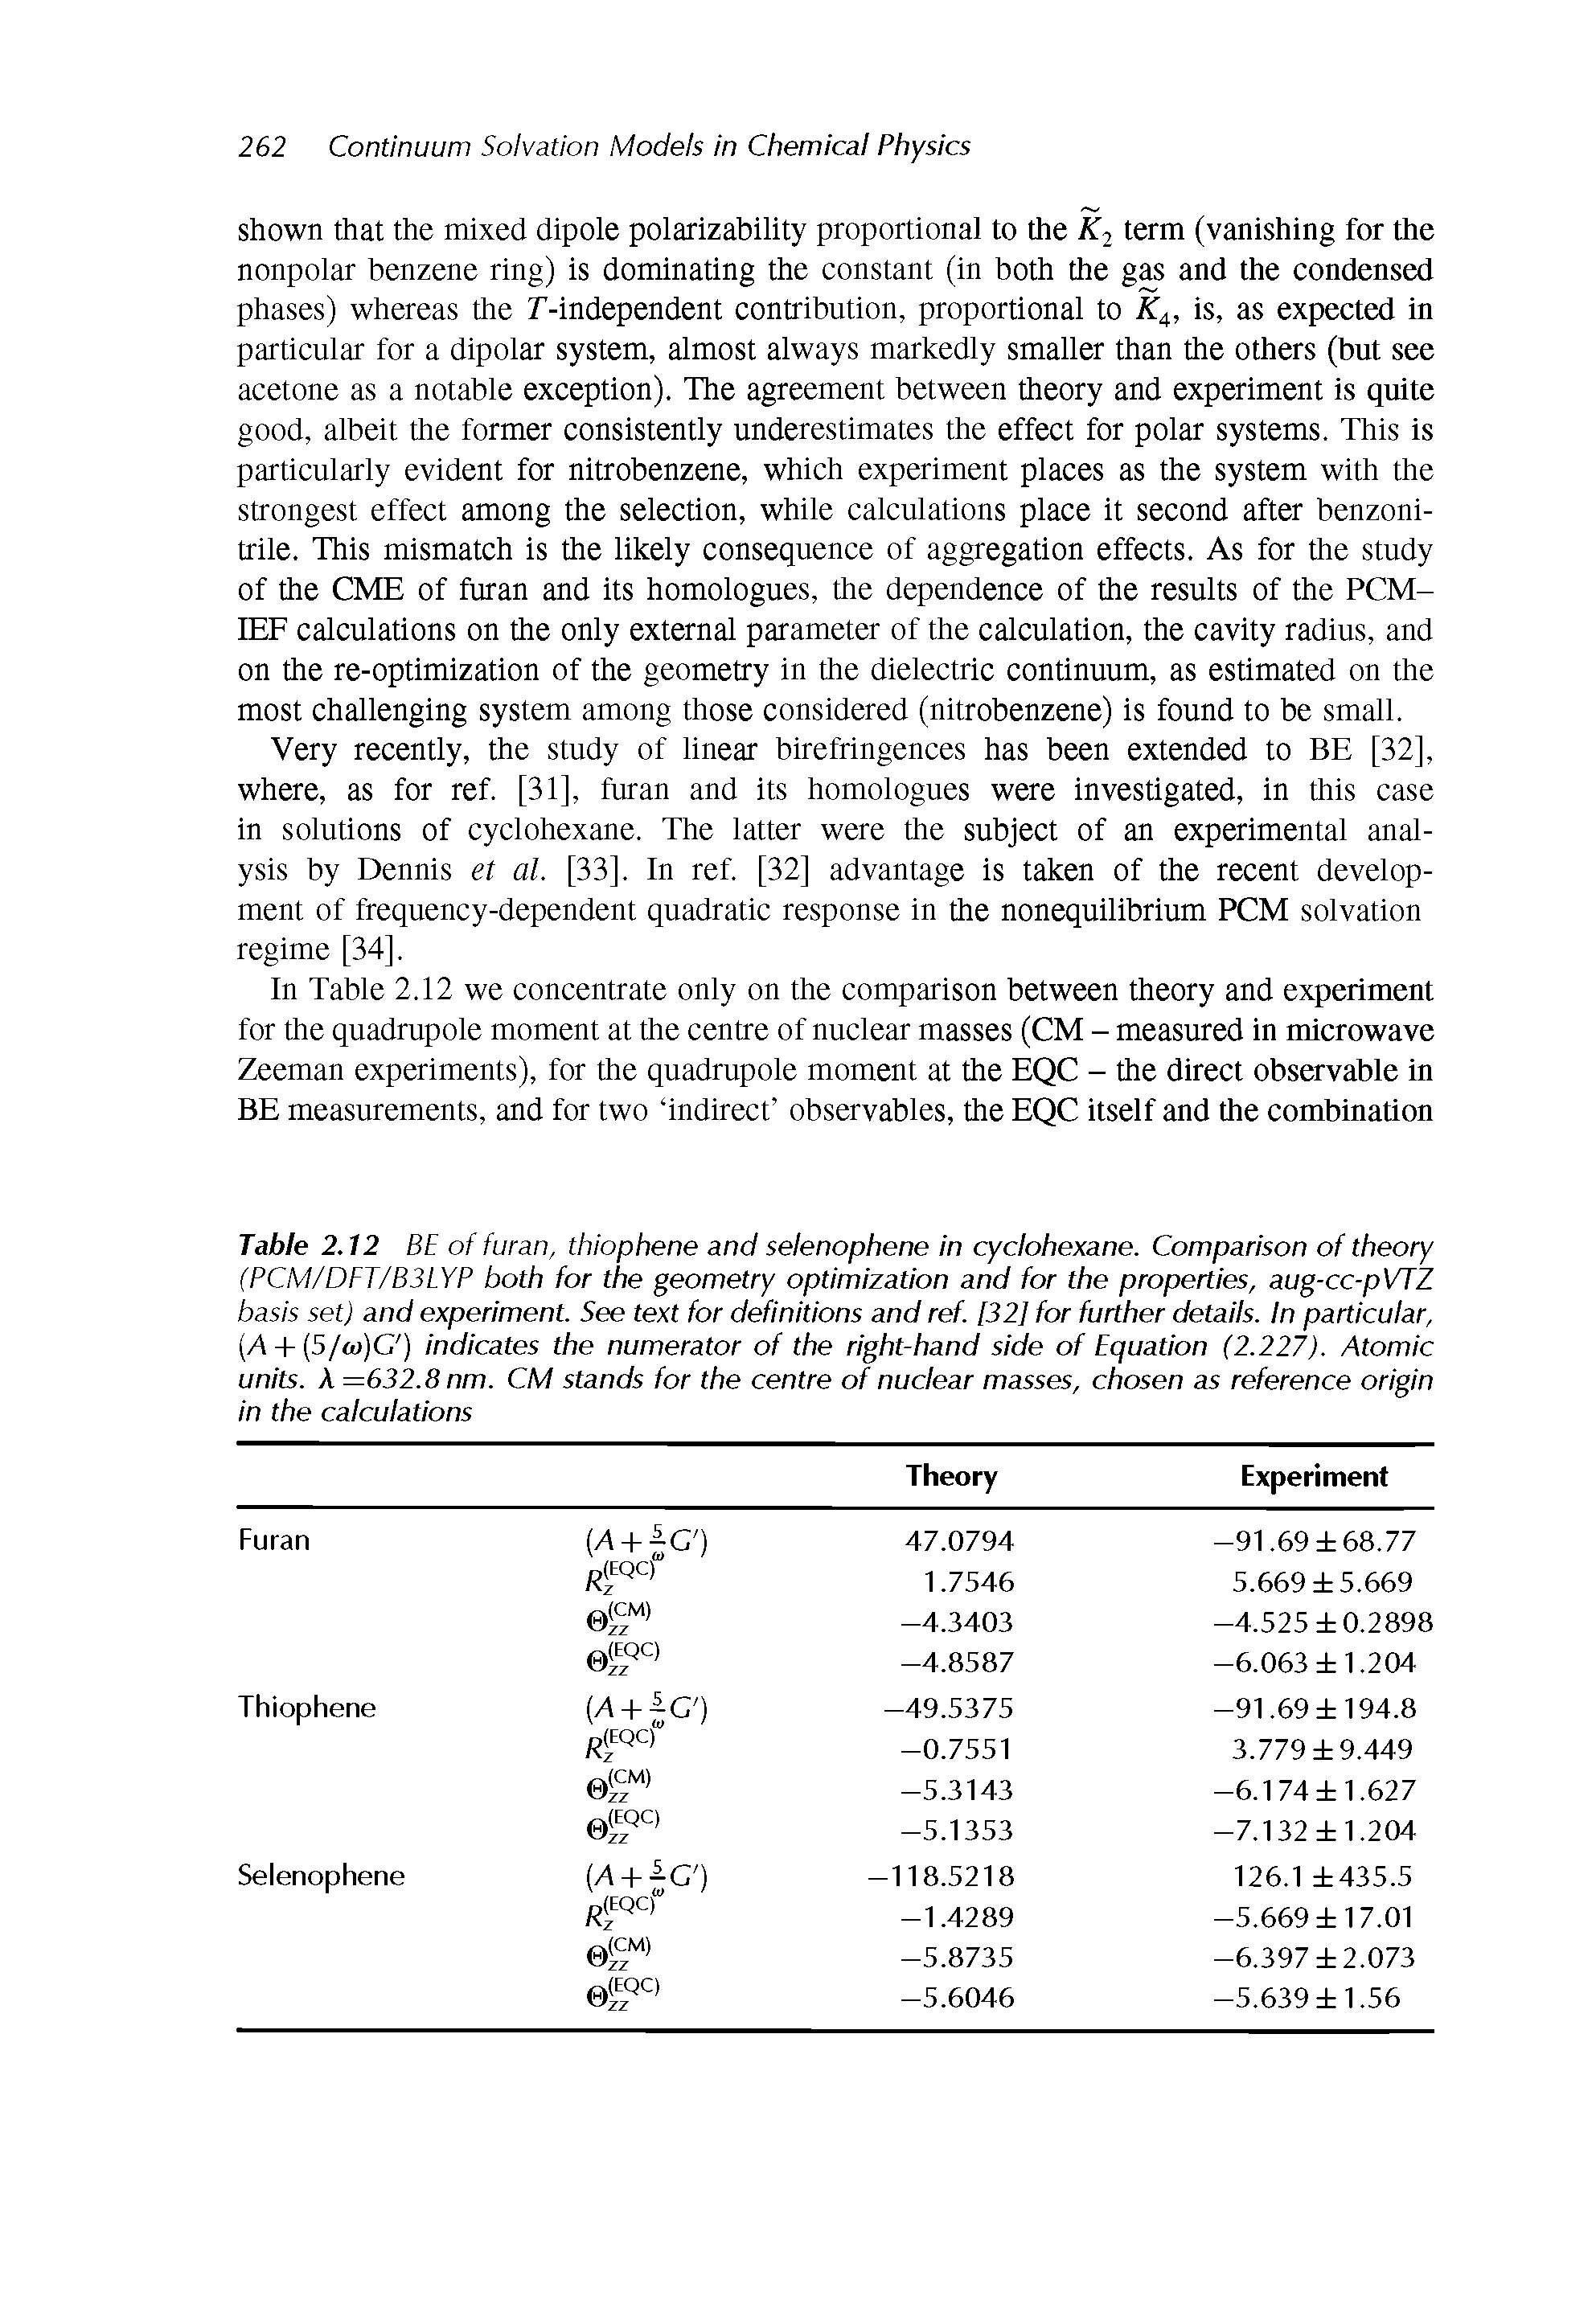 Table 2.12 BE of furan, thiophene and selenophene in cyclohexane. Comparison of theory (PCM/DFT/B3LYP both for the geometry optimization and for the properties, aug-cc-pVTZ basis set) and experiment. See text for definitions and ref. [32] for further details. In particular, i/ + (S/oijC ) indicates the numerator of the right-hand side of Equation (2.227). Atomic units. A =632.8 nm. CM stands for the centre of nuclear masses, chosen as reference origin in the calculations...